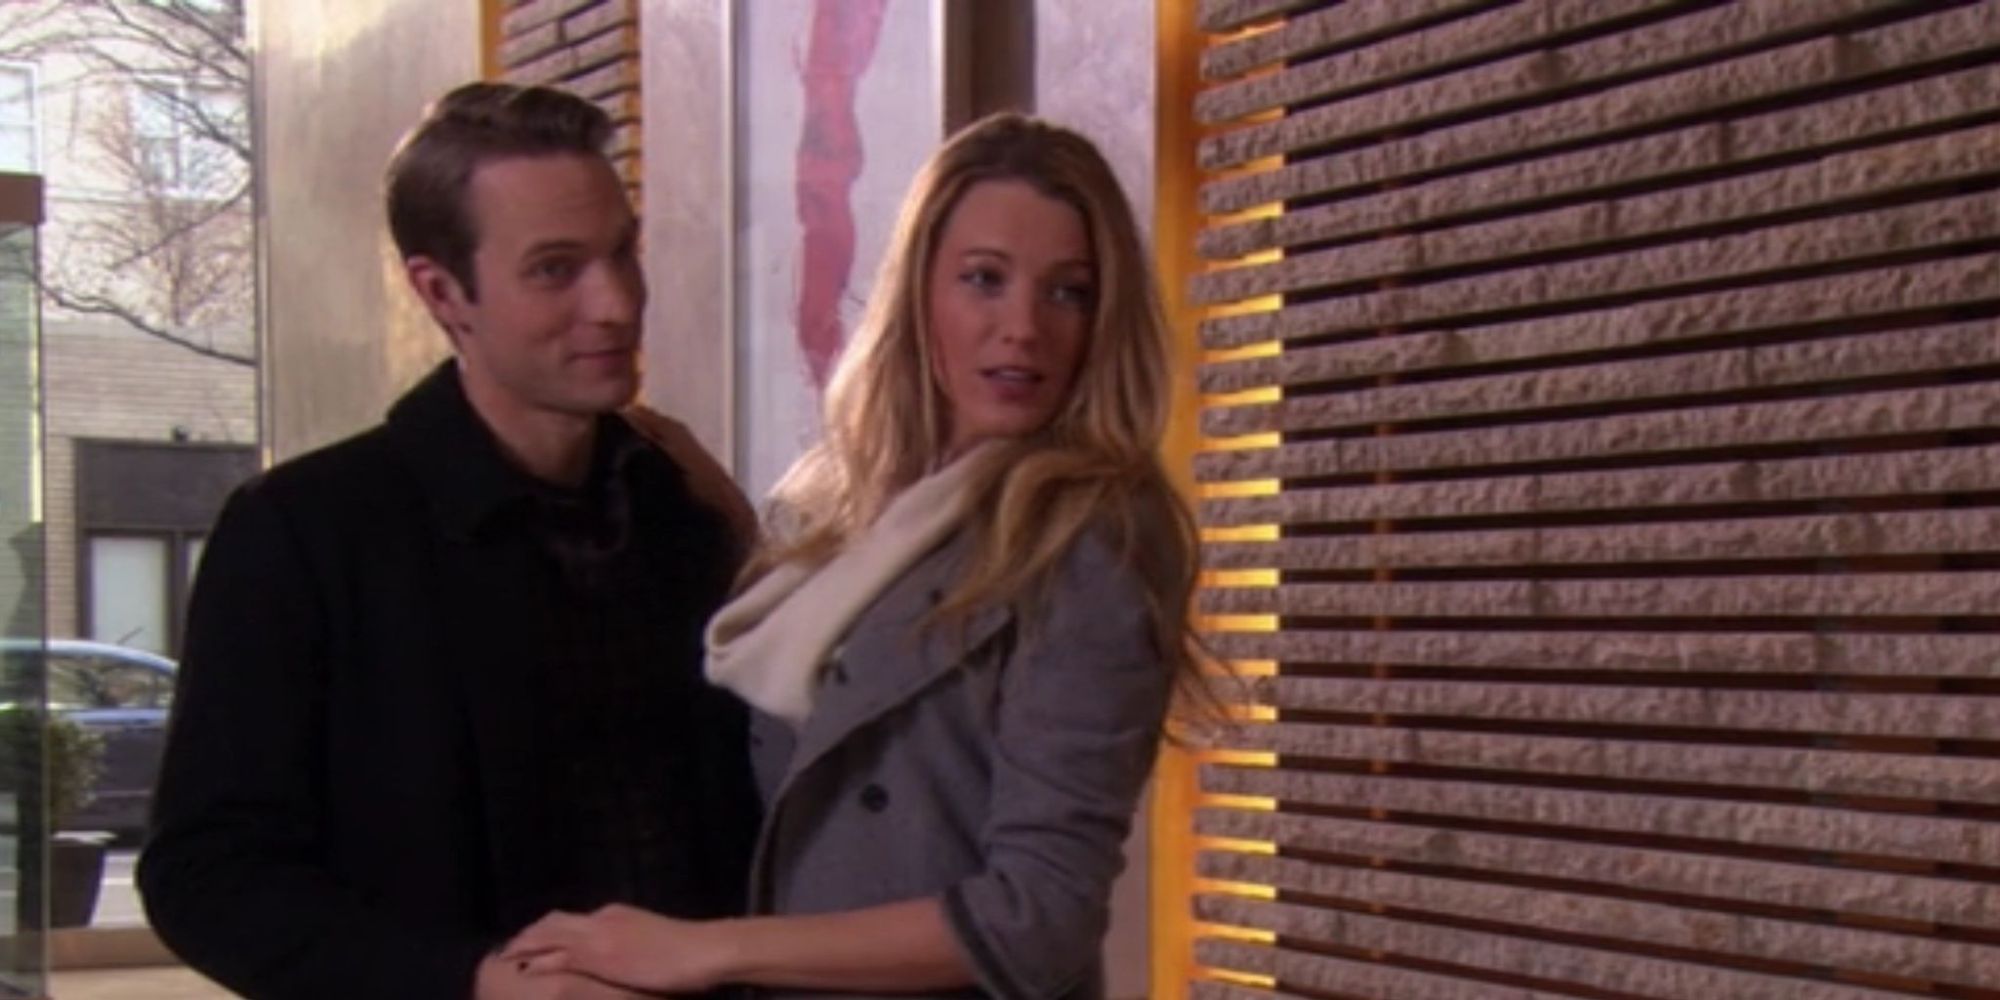 Serena and Ben are holding hands.